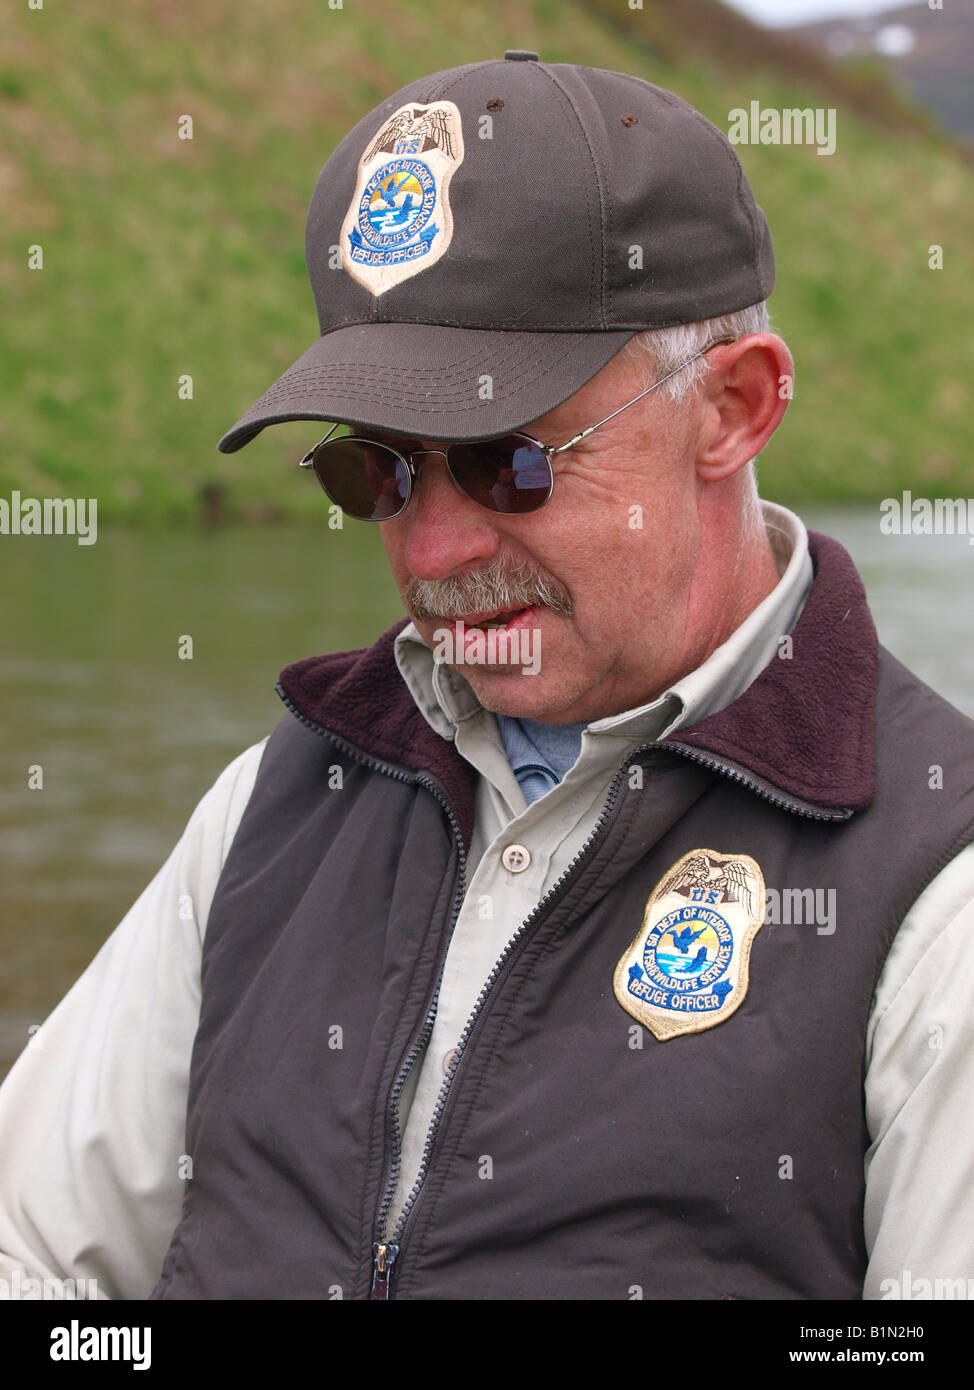 US Fish and Wildlife Service Officer Stockfoto